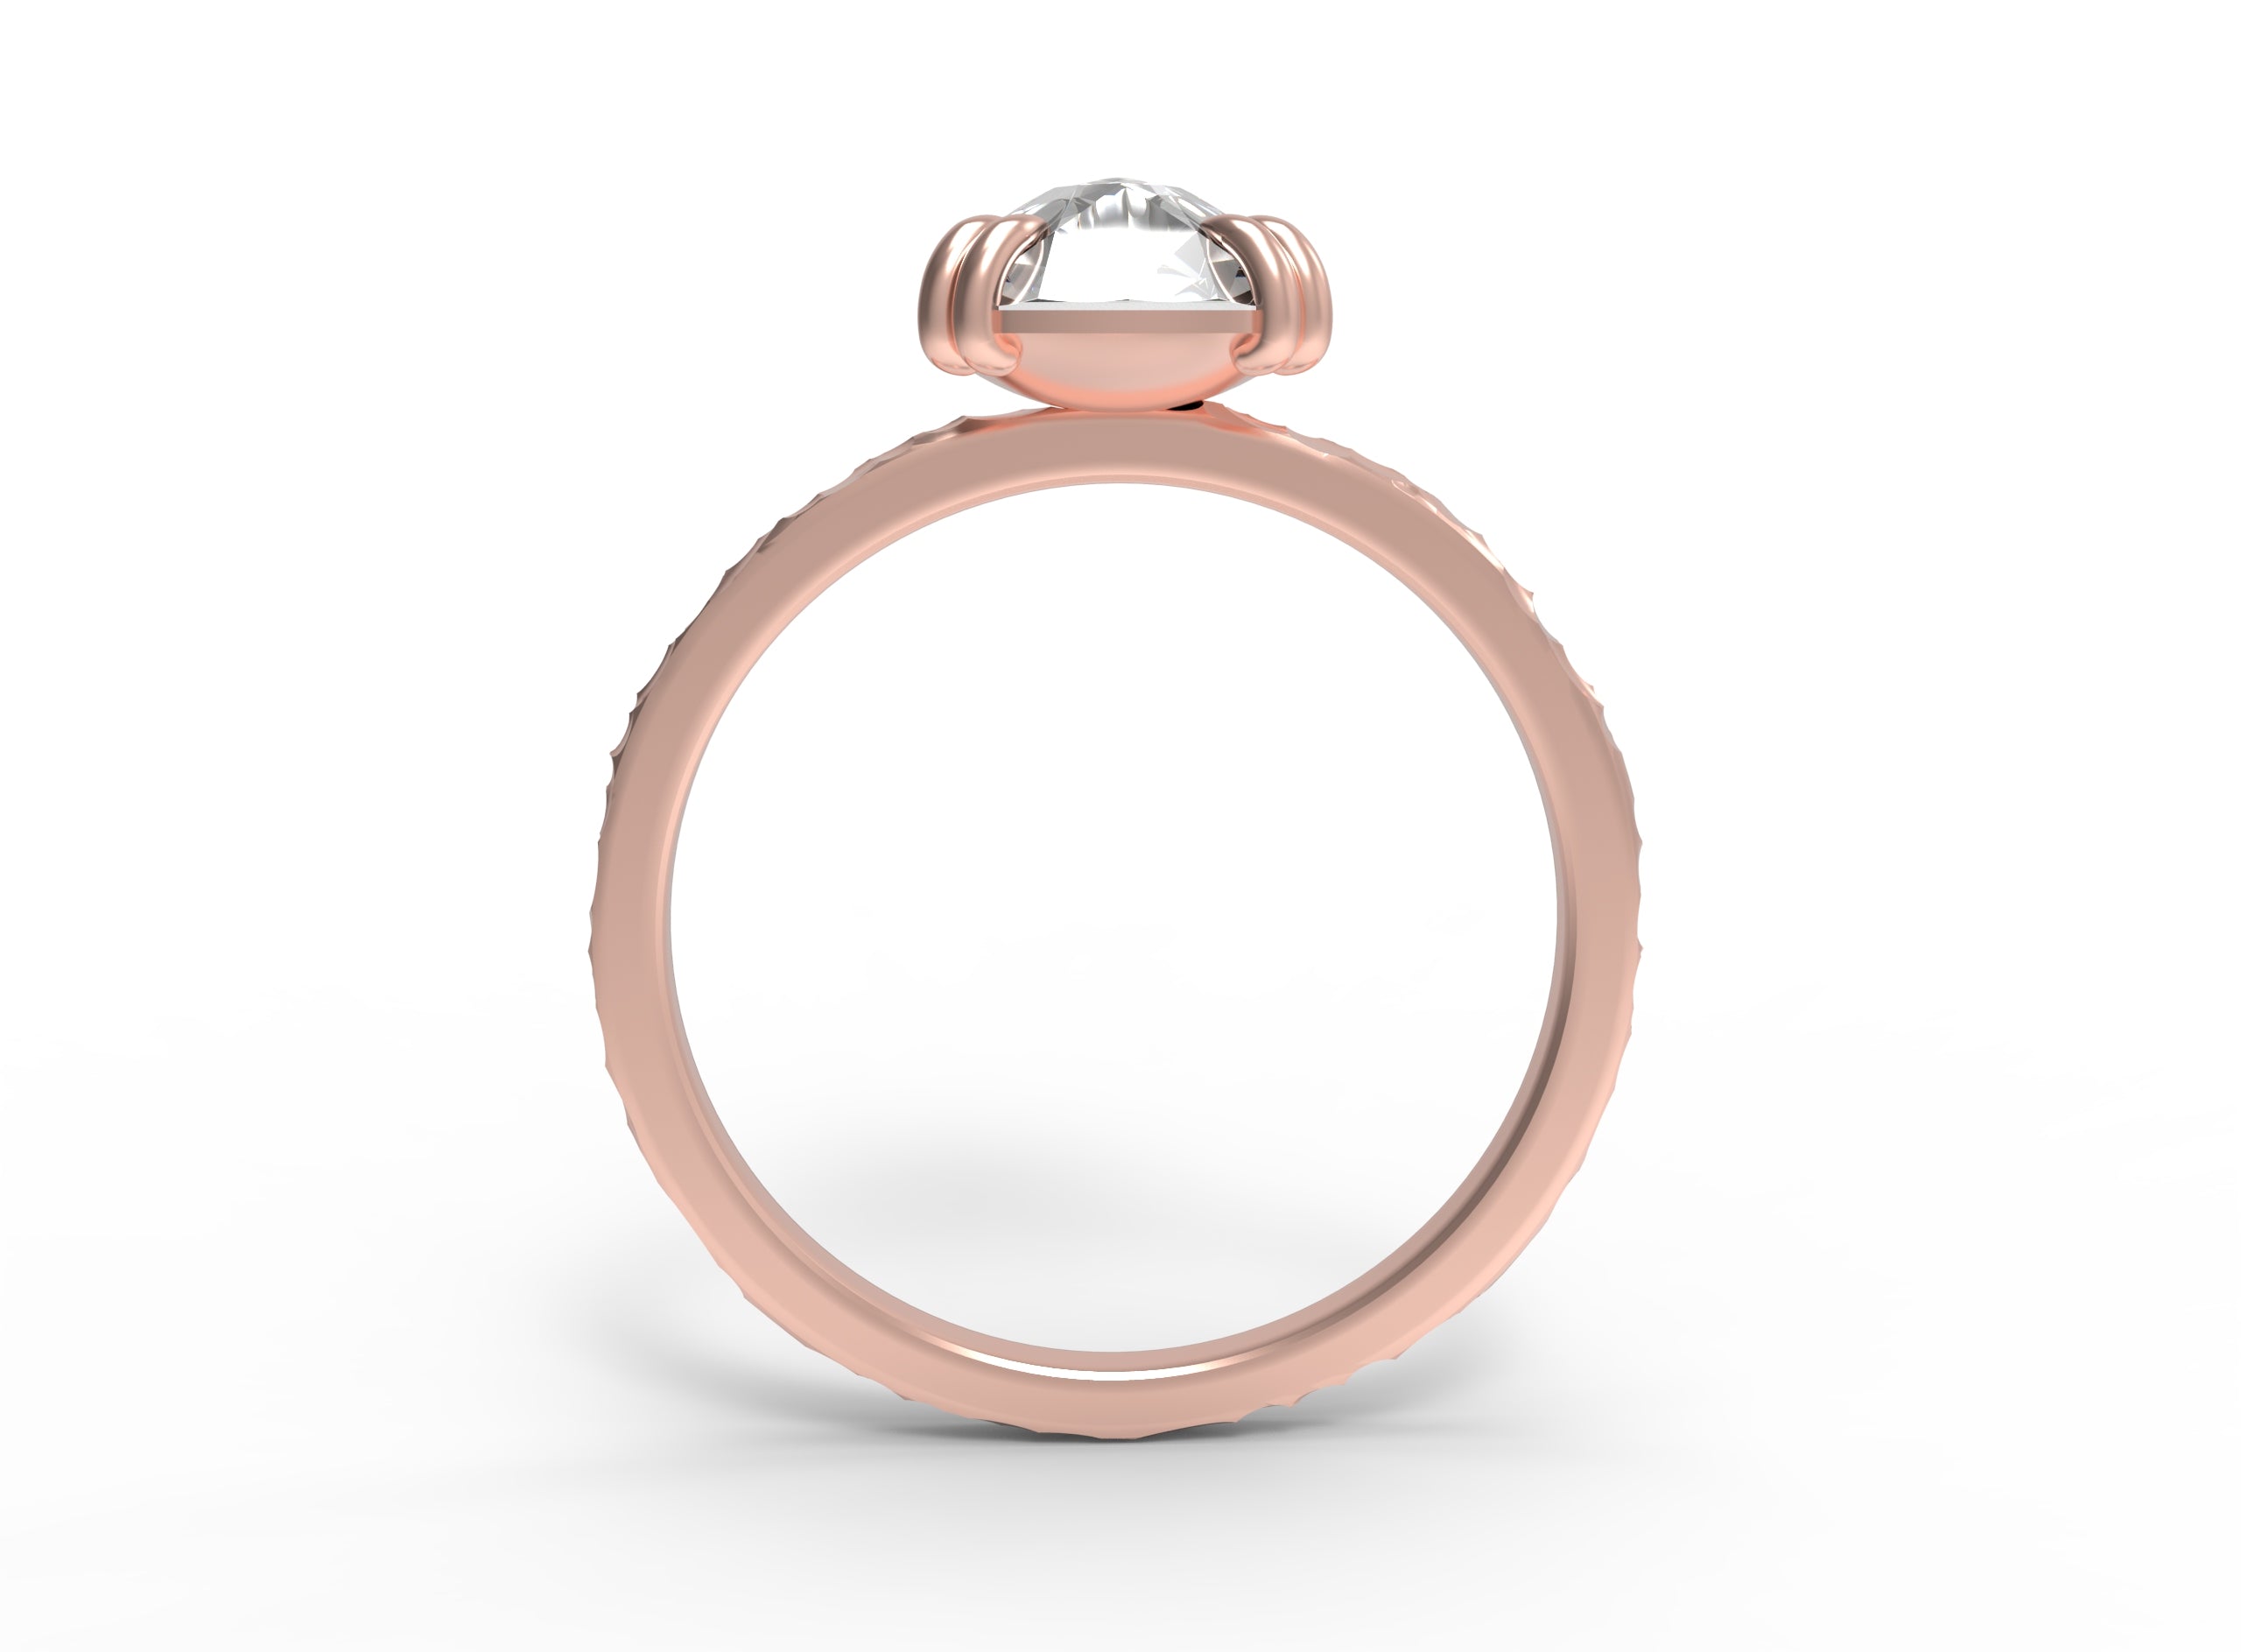 Close up view of the  Classic Talon Solitaire Engagement Ring in rose gold 3